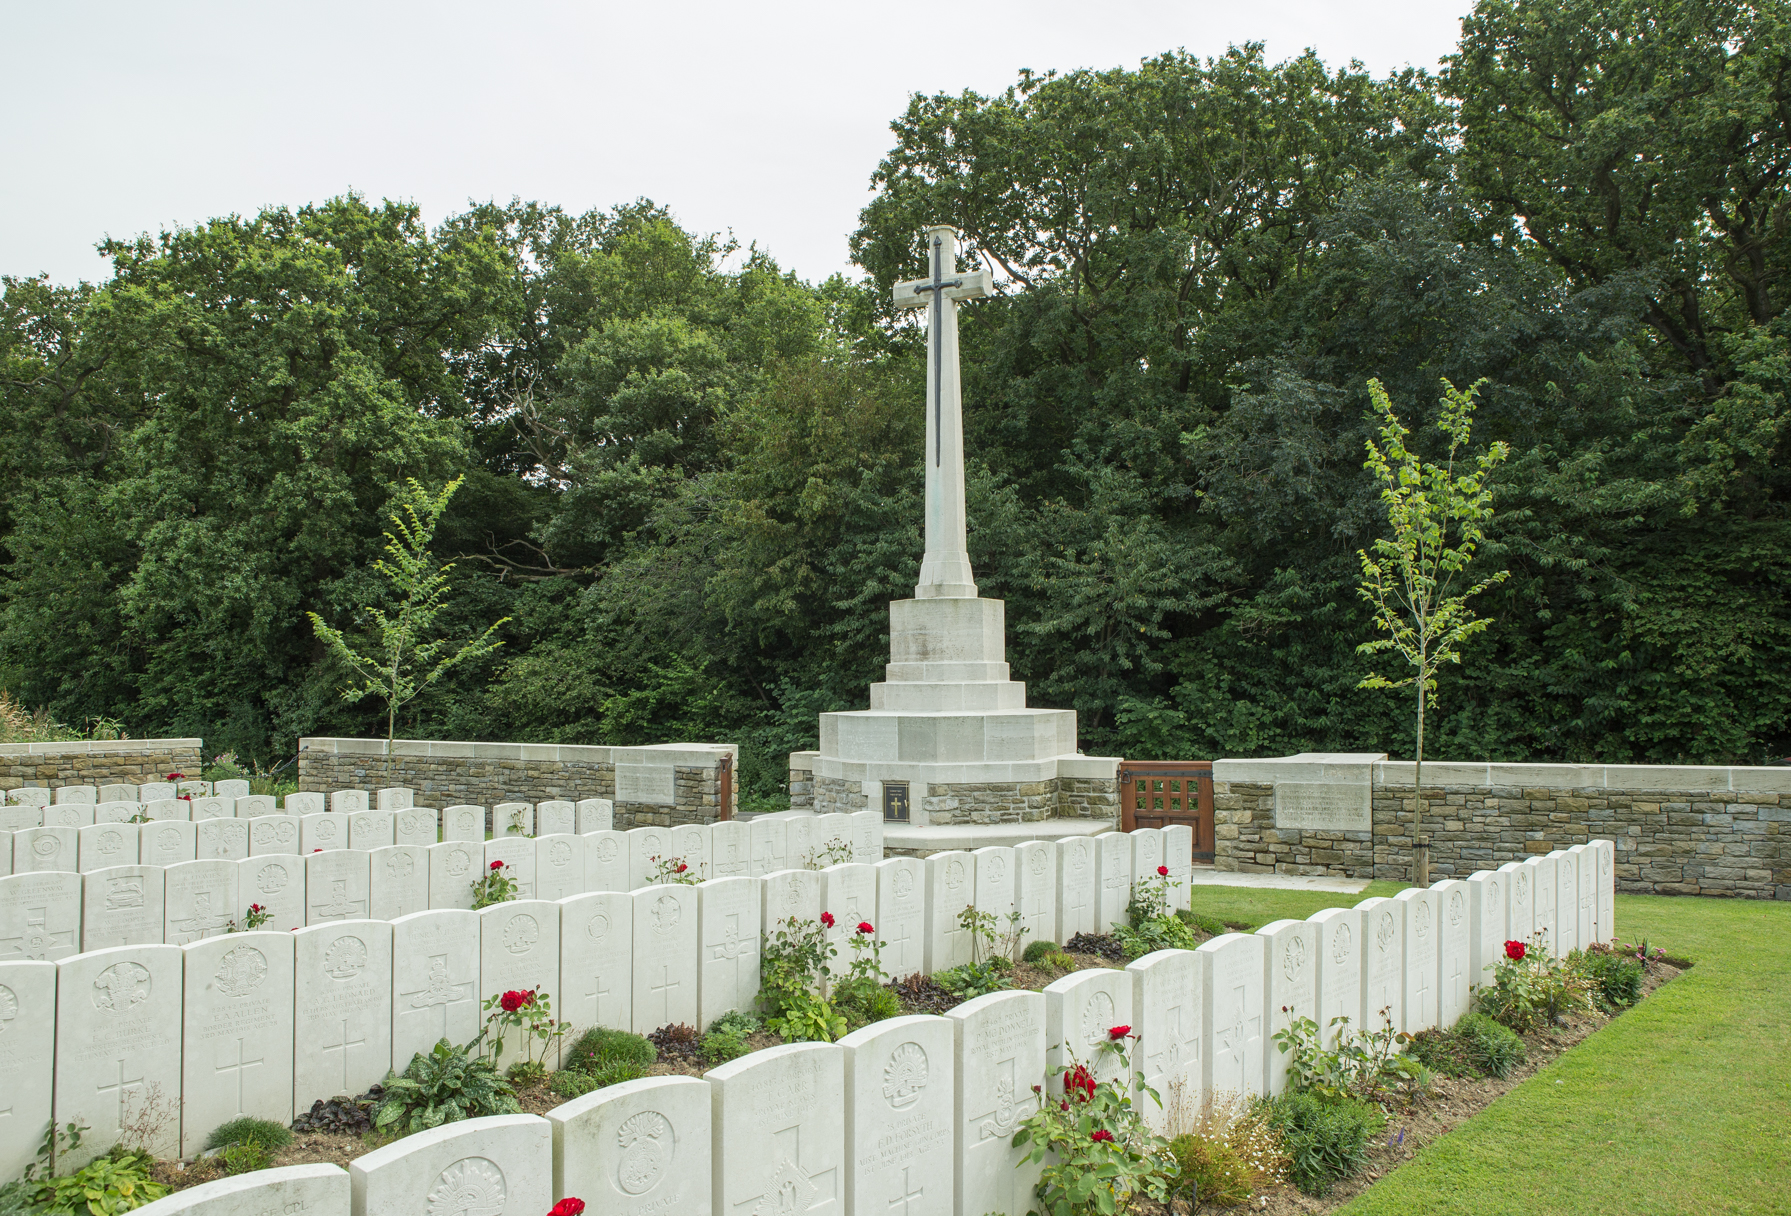 Ebblinghem Military Cemetery with rows of gravestones and the Cross of Sacrifice in the background